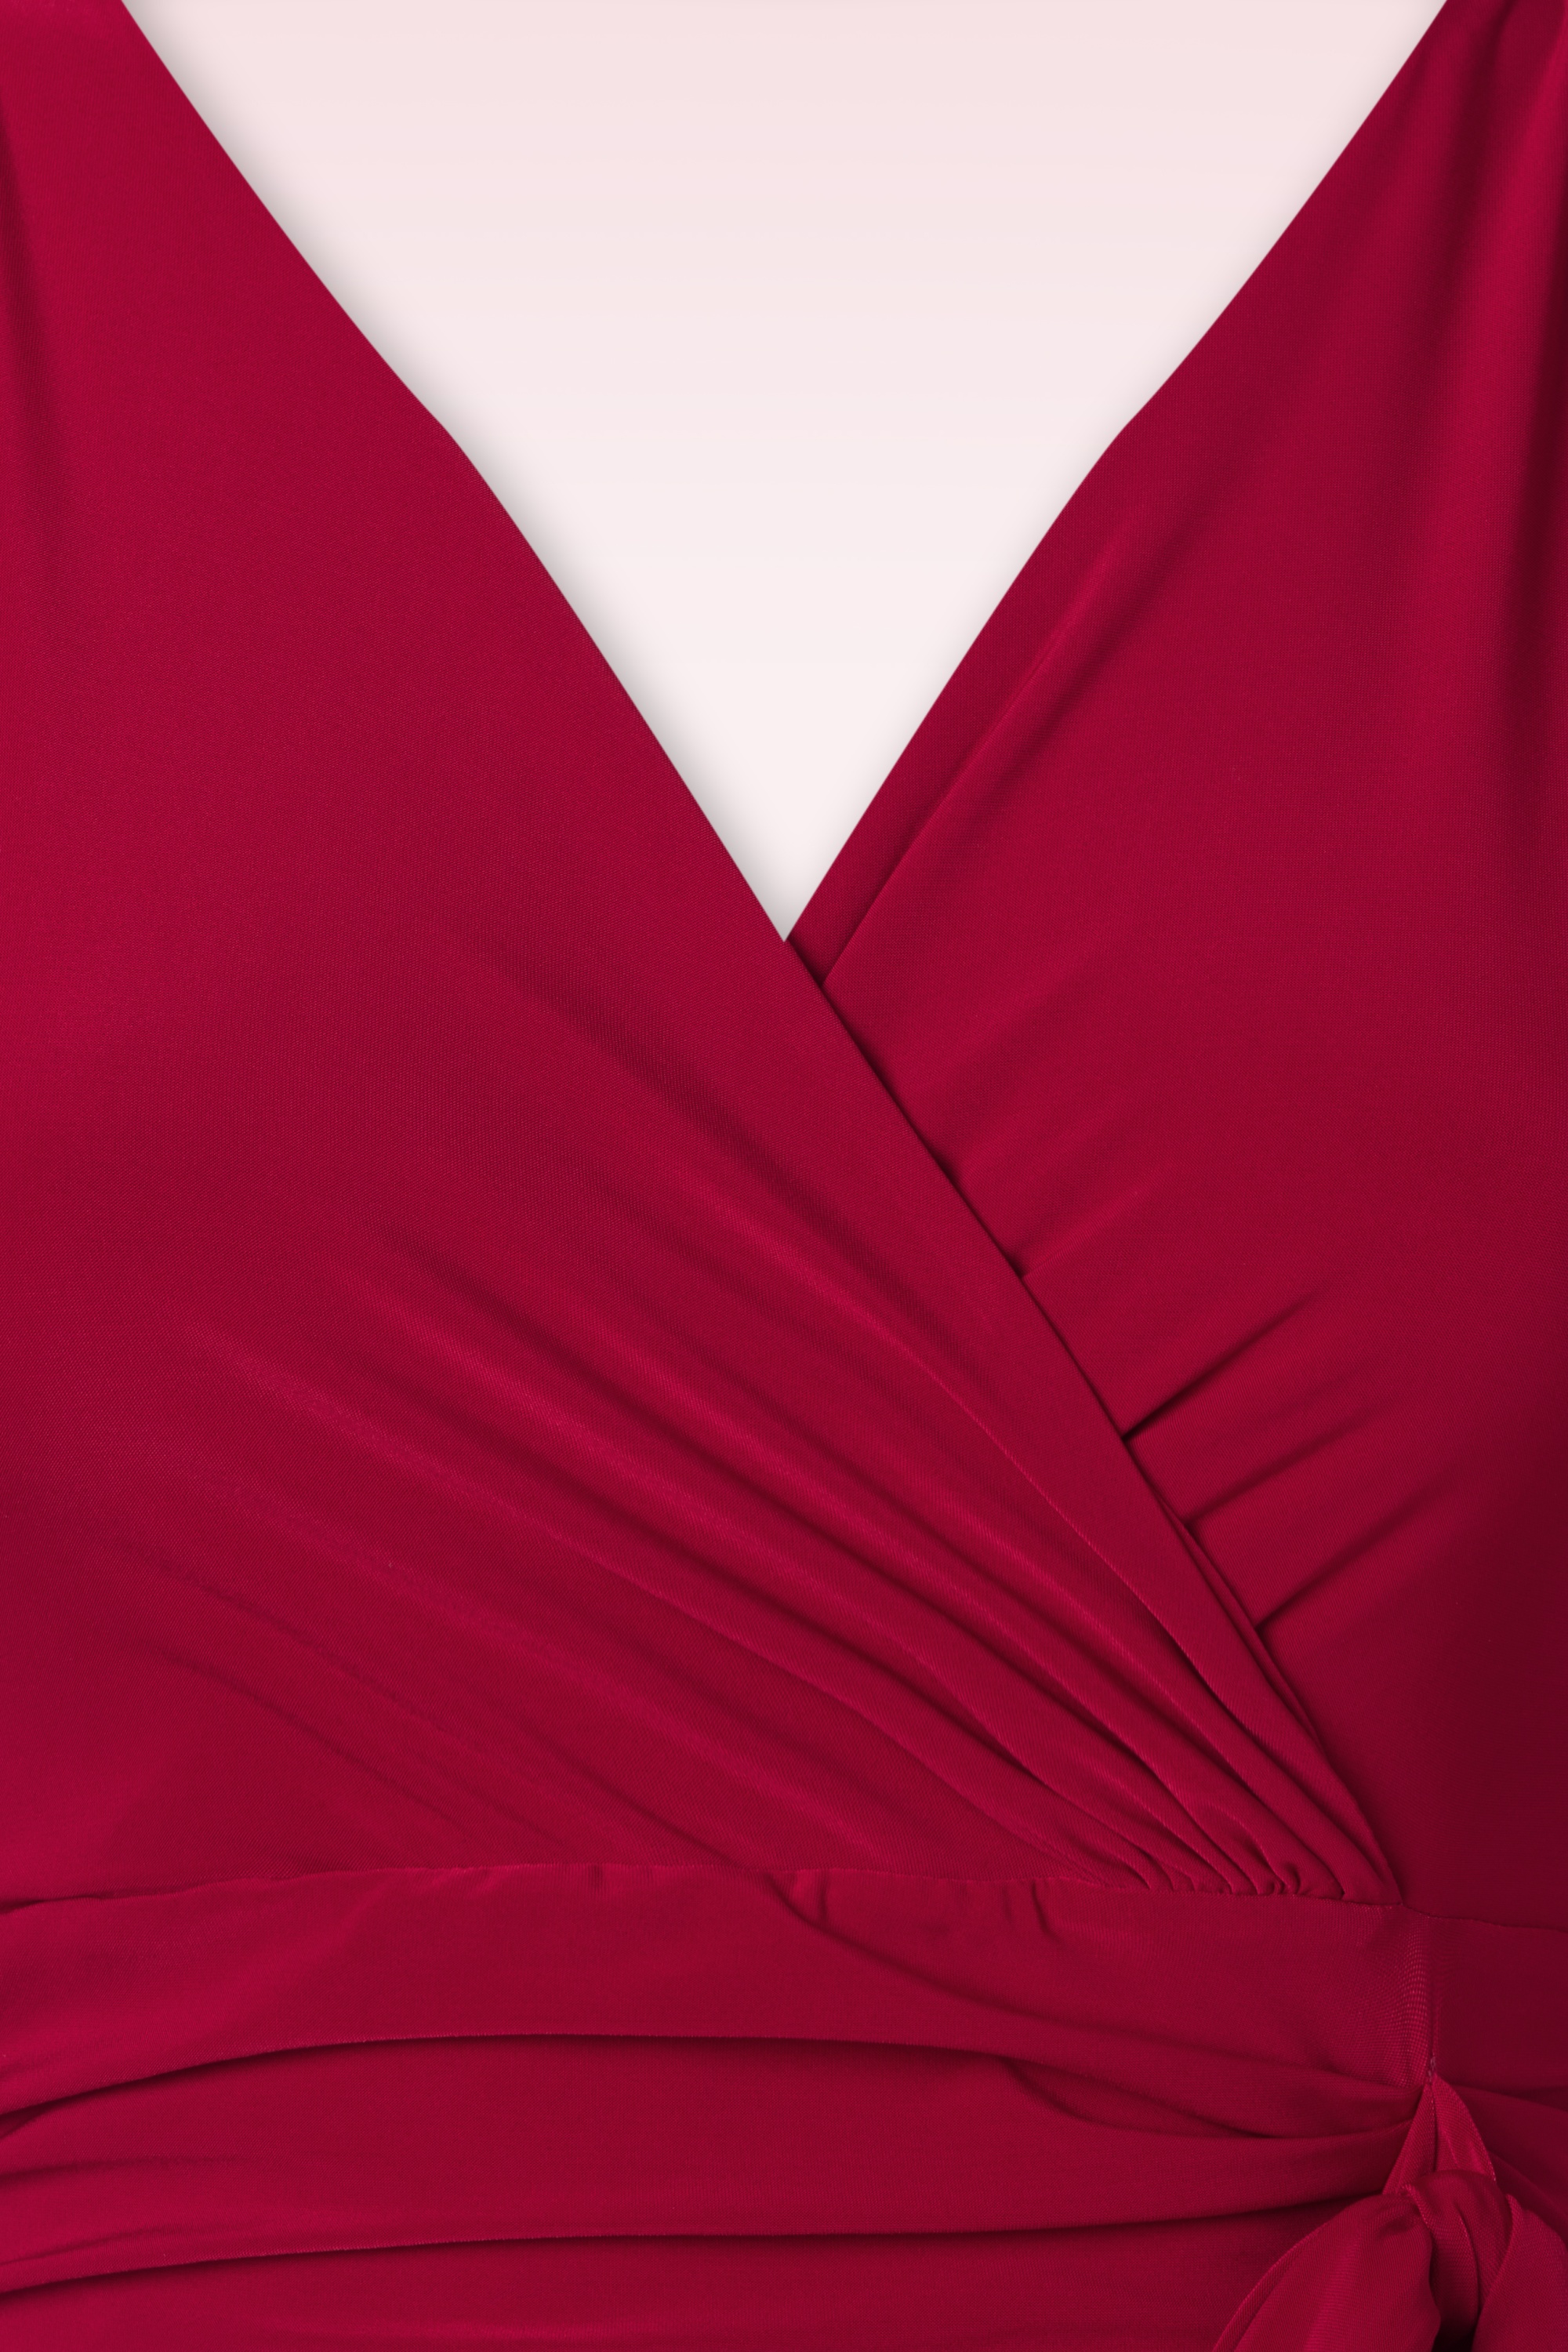 Vintage Chic for Topvintage - Desiree pencil jurk in rood 4